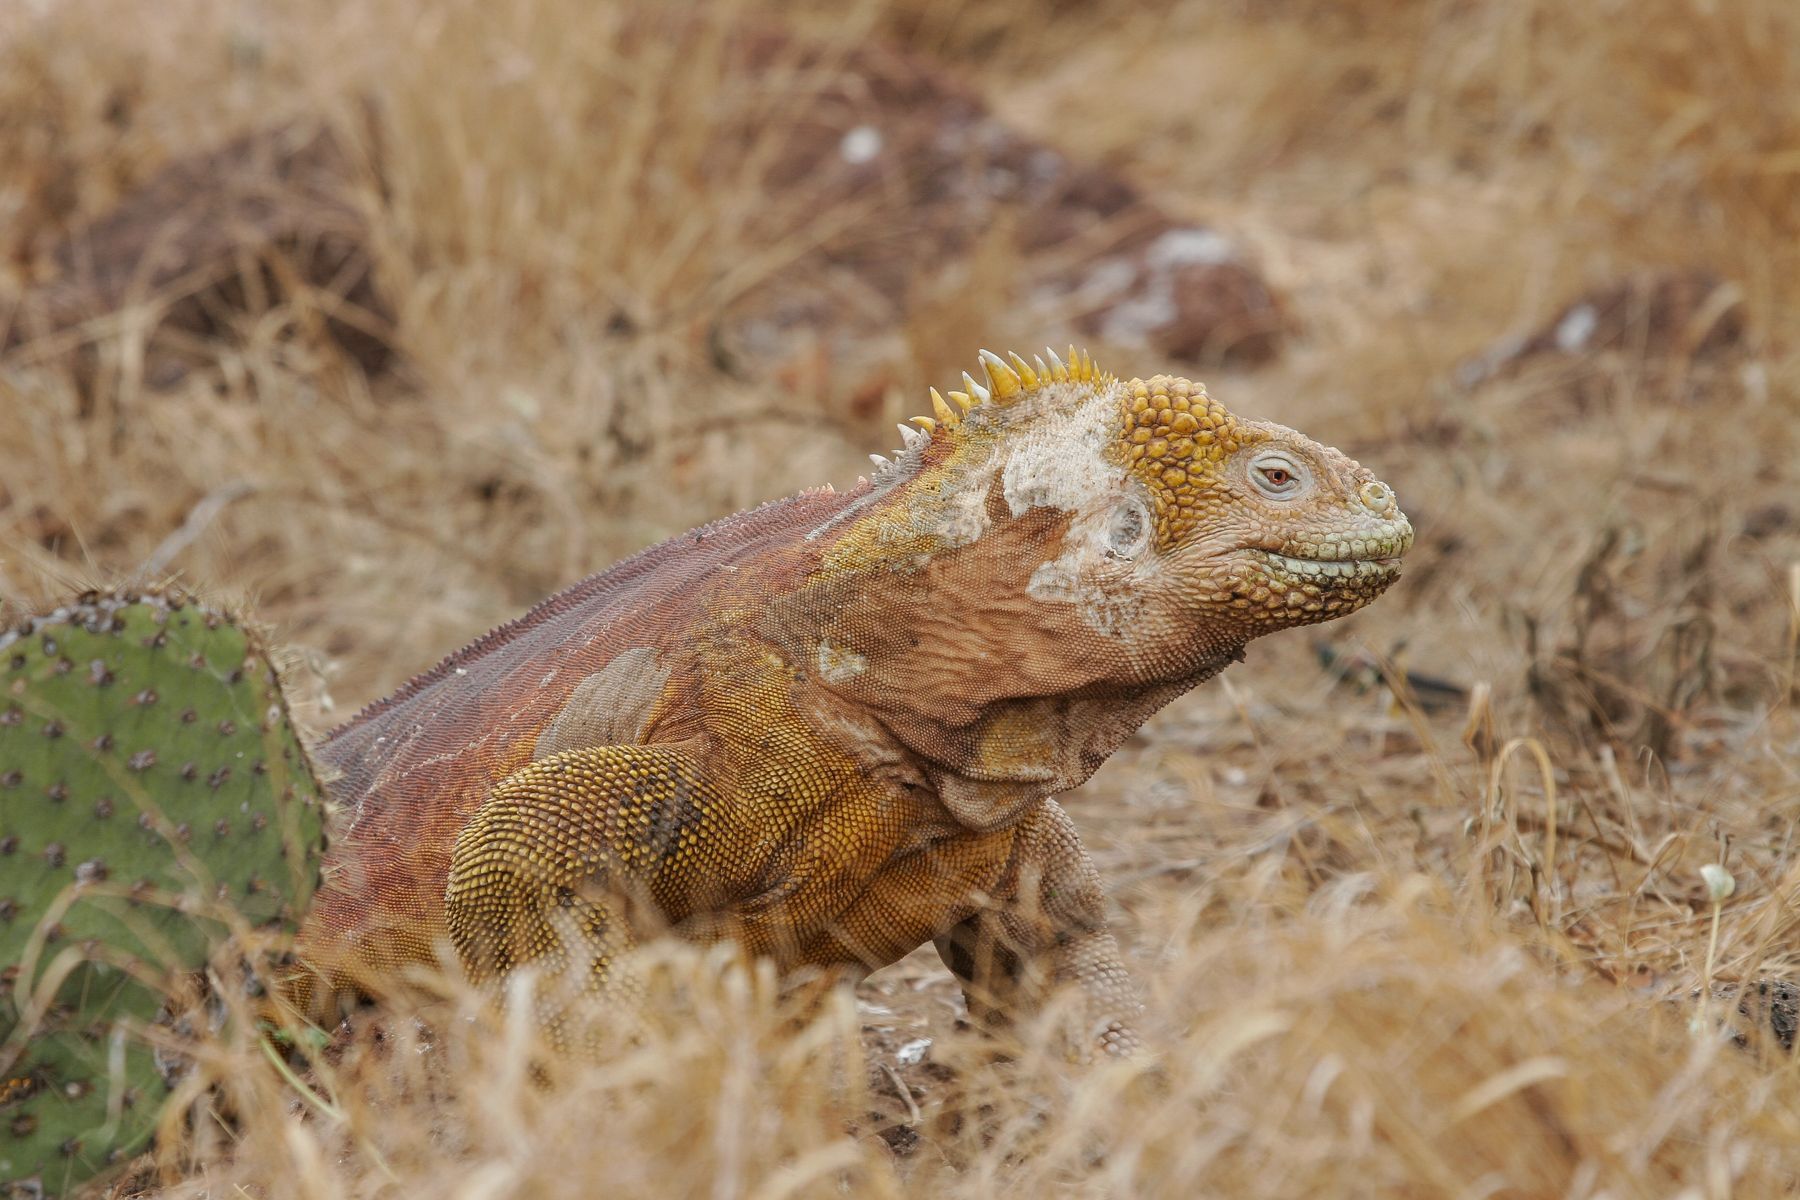 Land Iguanas like to eat the prickly pears